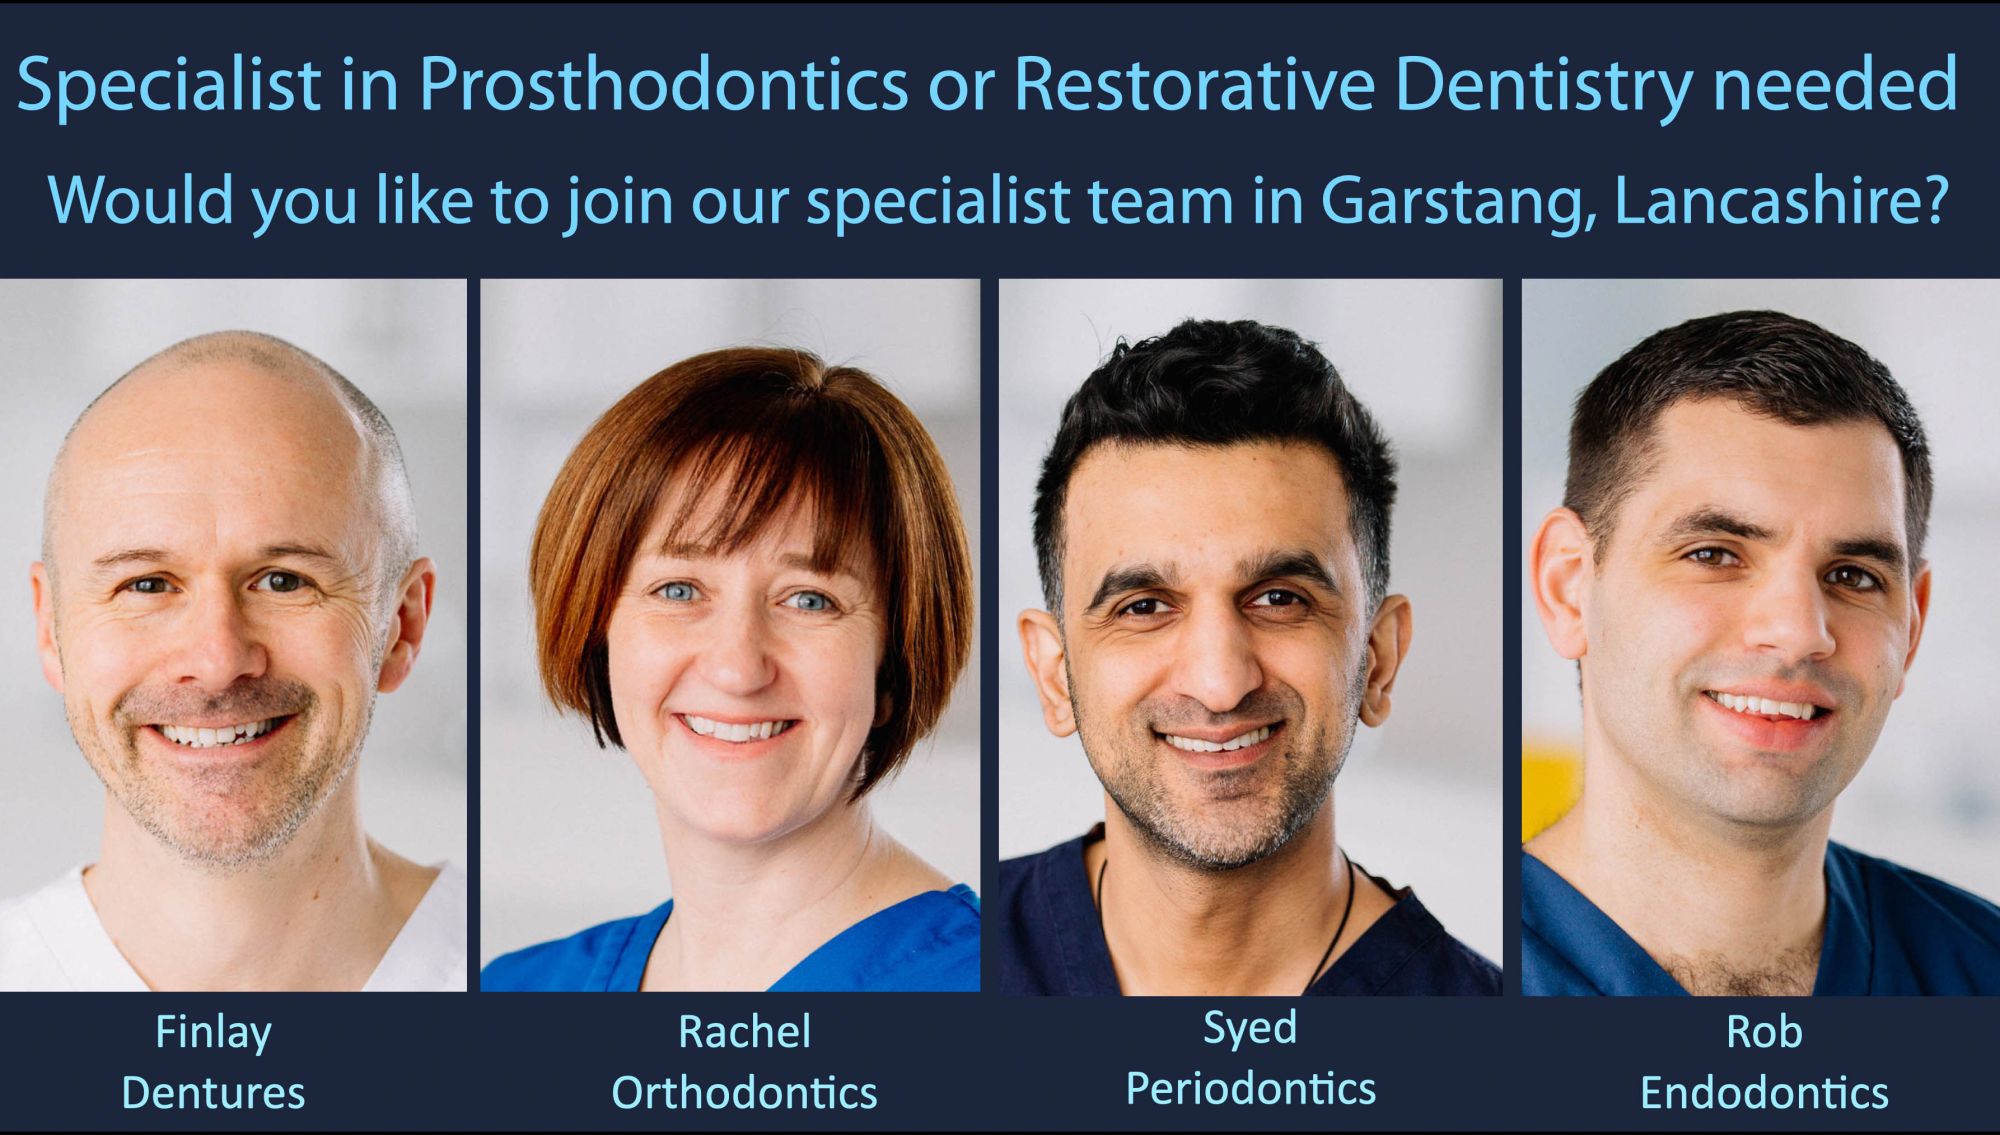 We need a Specialist in Prosthodontics or Restorative Dentistry